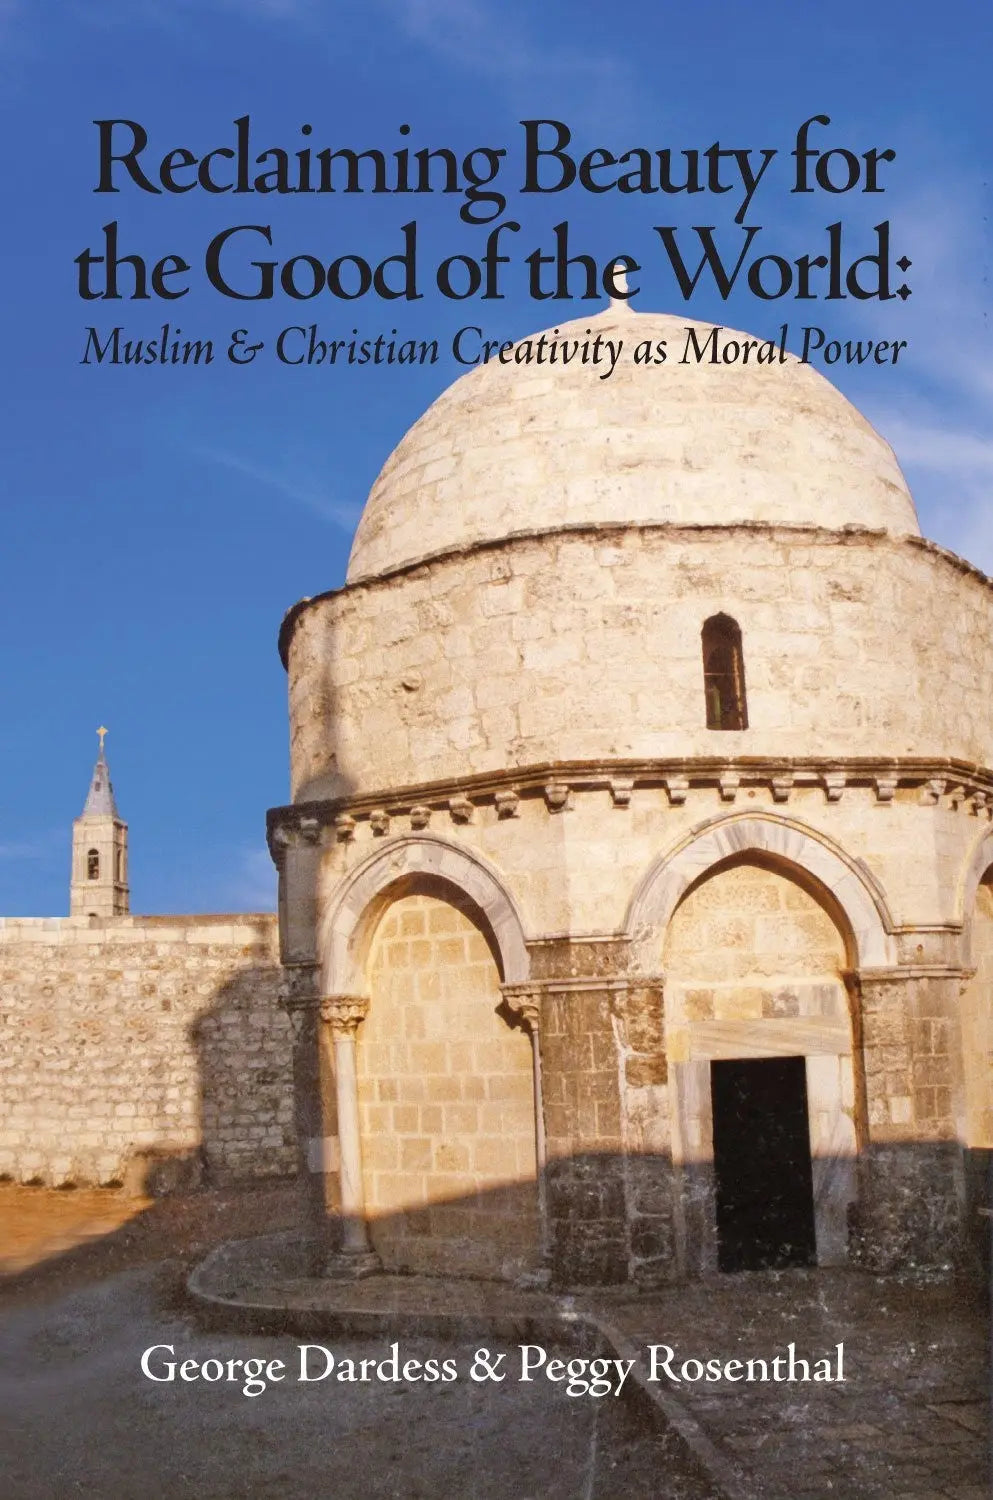 Reclaiming Beauty for the Good of the World: Muslim & Christian Creativity as Moral Power Fons Vitae